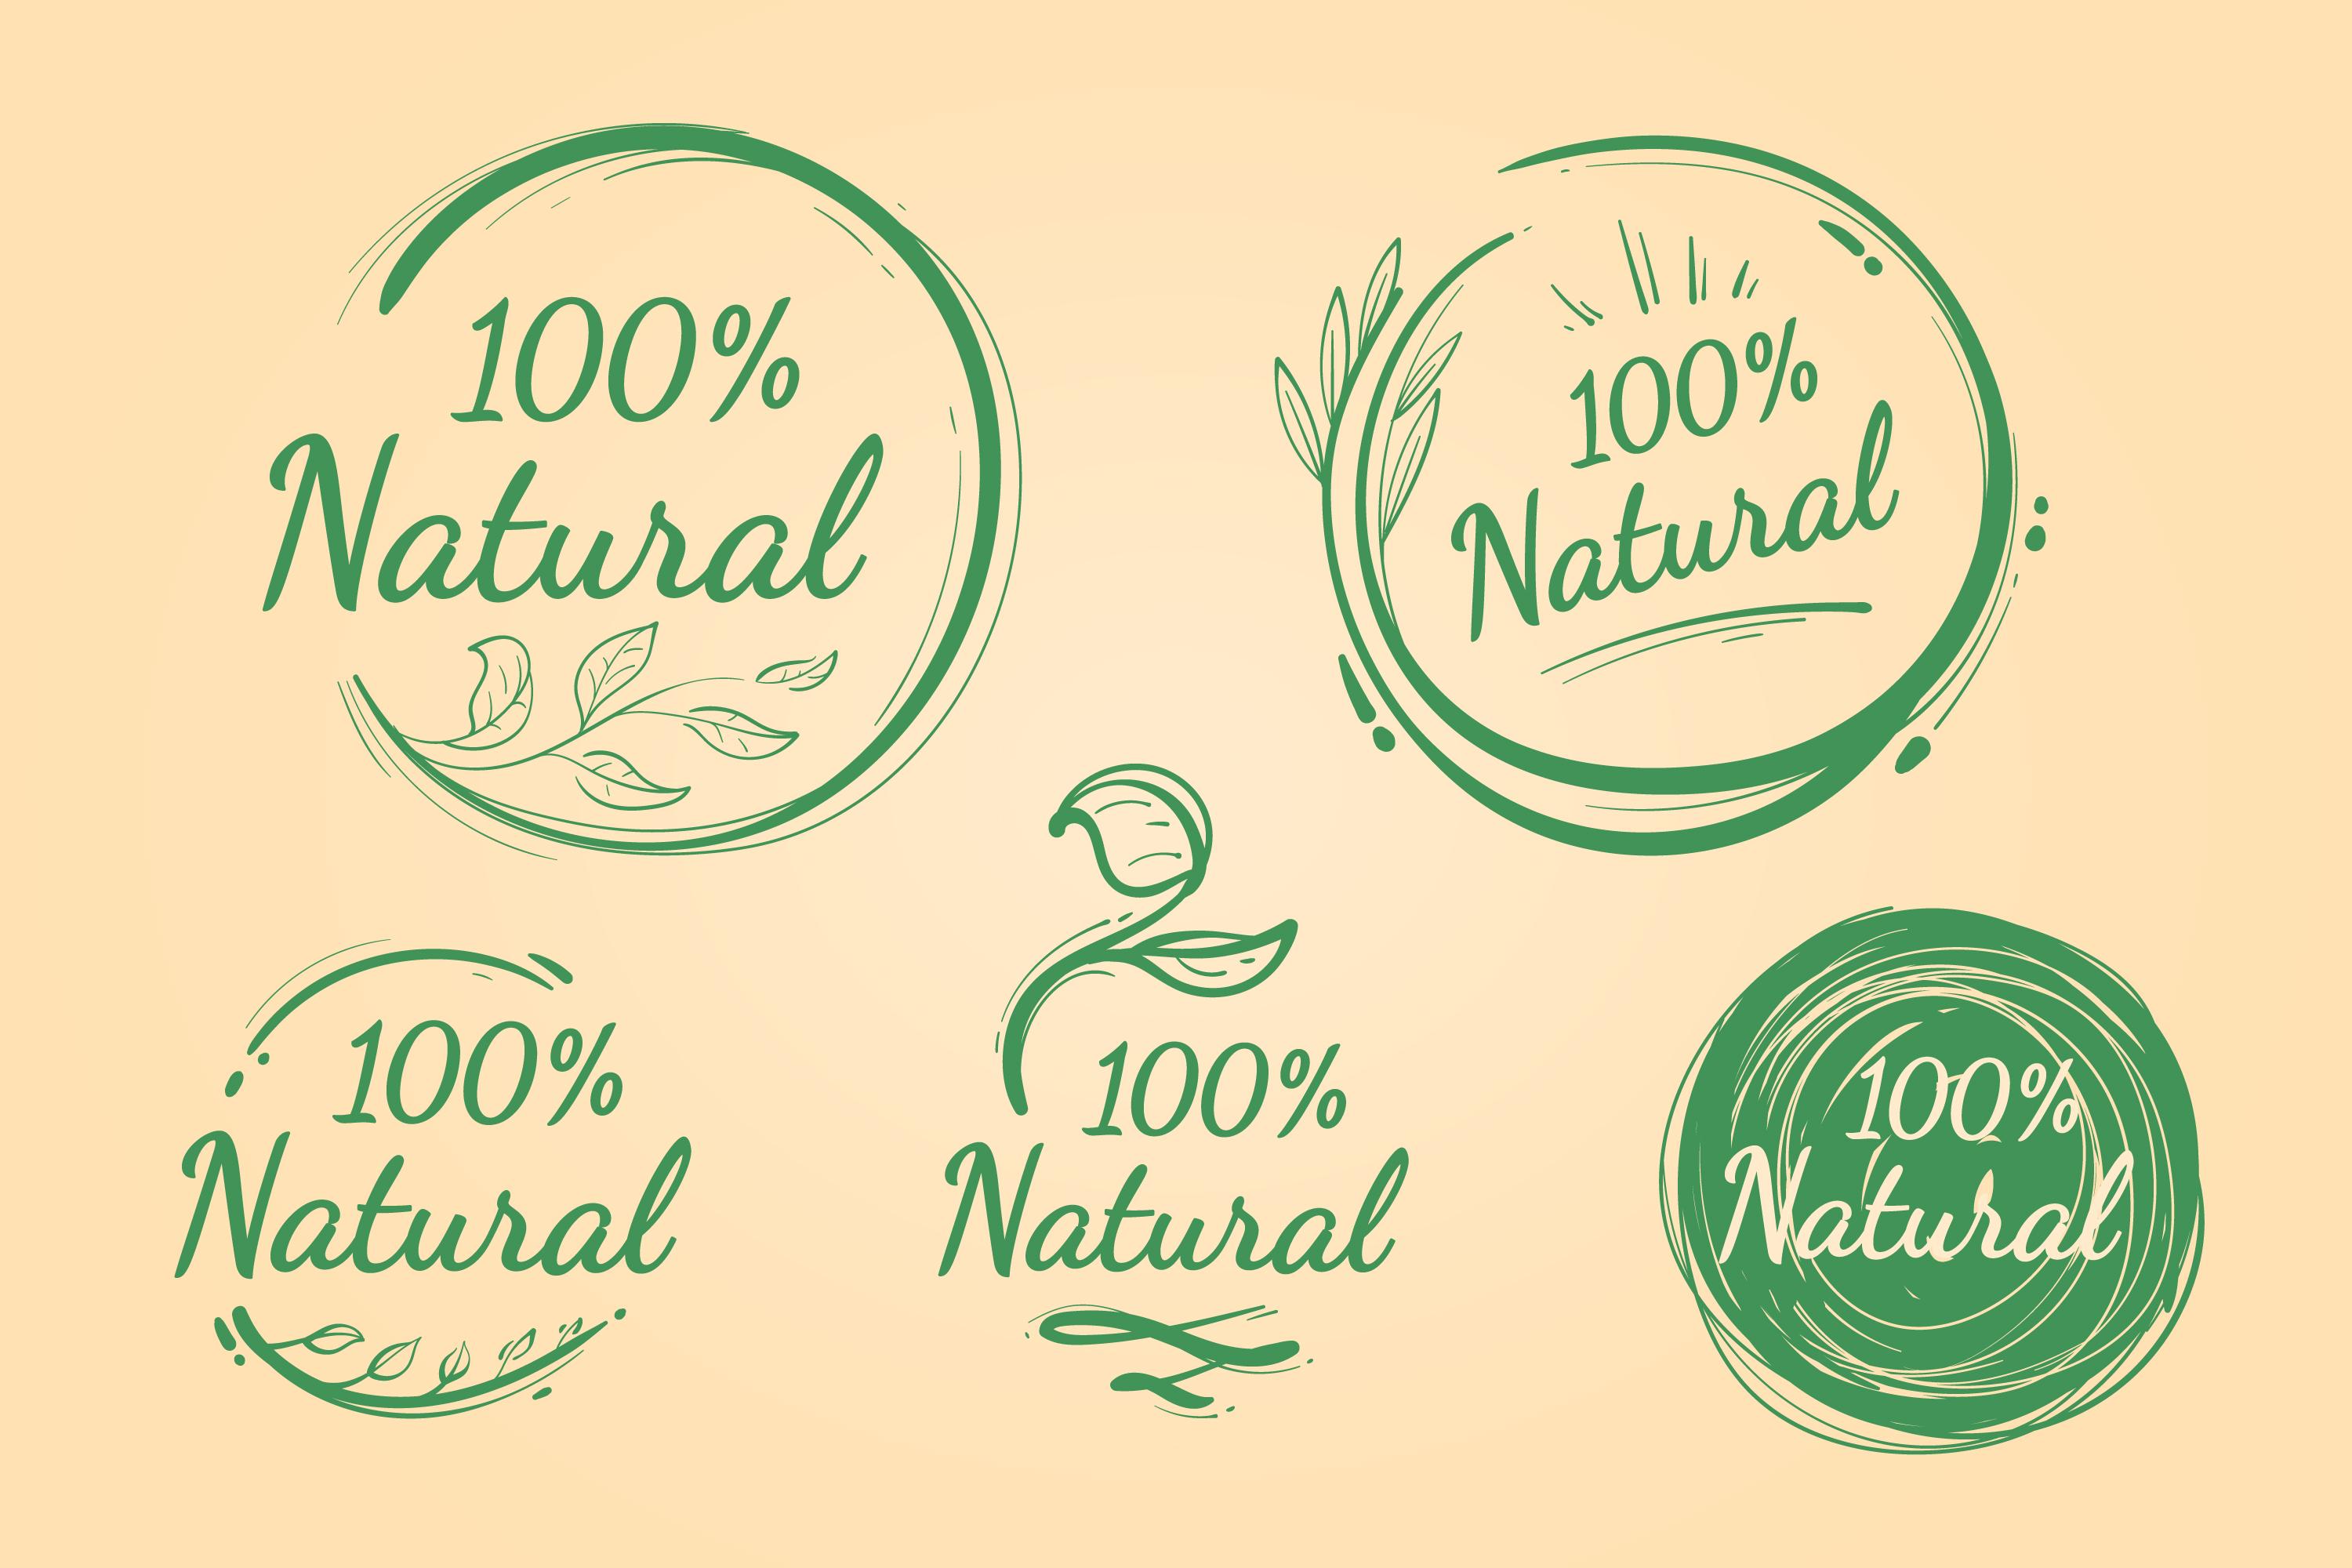 Adopting Organic Products: Benefits to Health, Environment, and Society